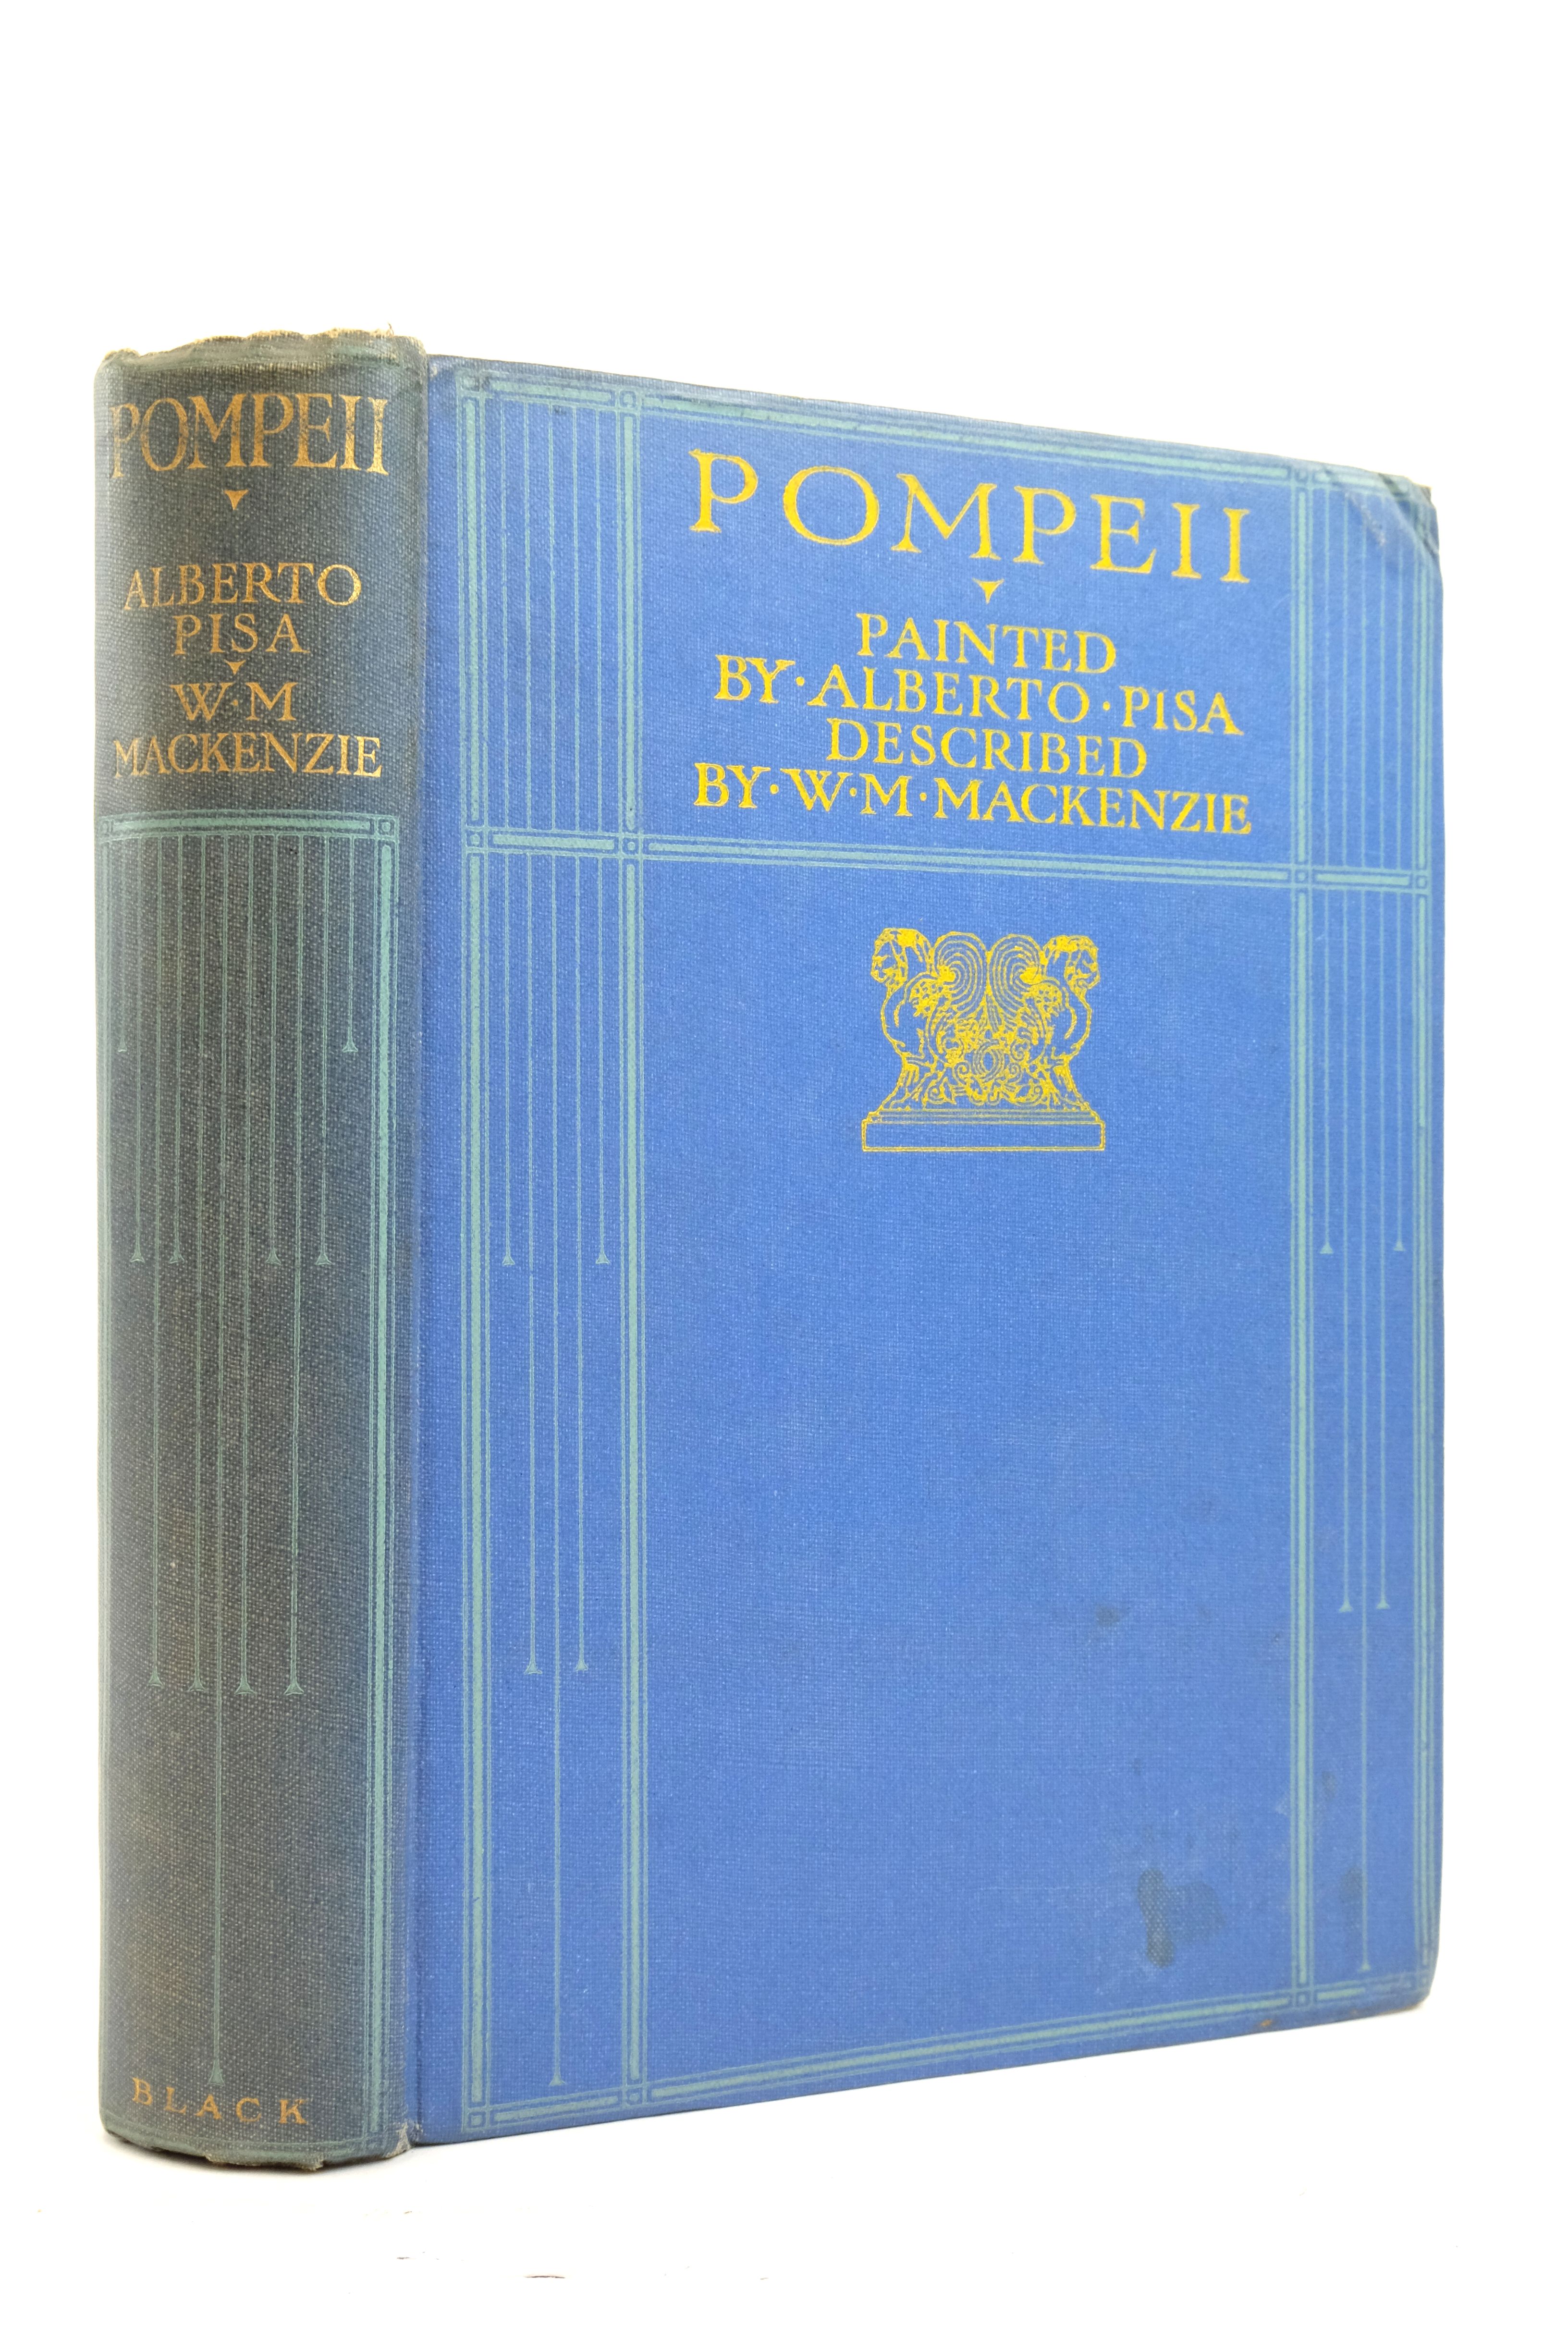 Photo of POMPEII written by Mackenzie, W.M. illustrated by Pisa, Alberto published by A. & C. Black (STOCK CODE: 2137054)  for sale by Stella & Rose's Books